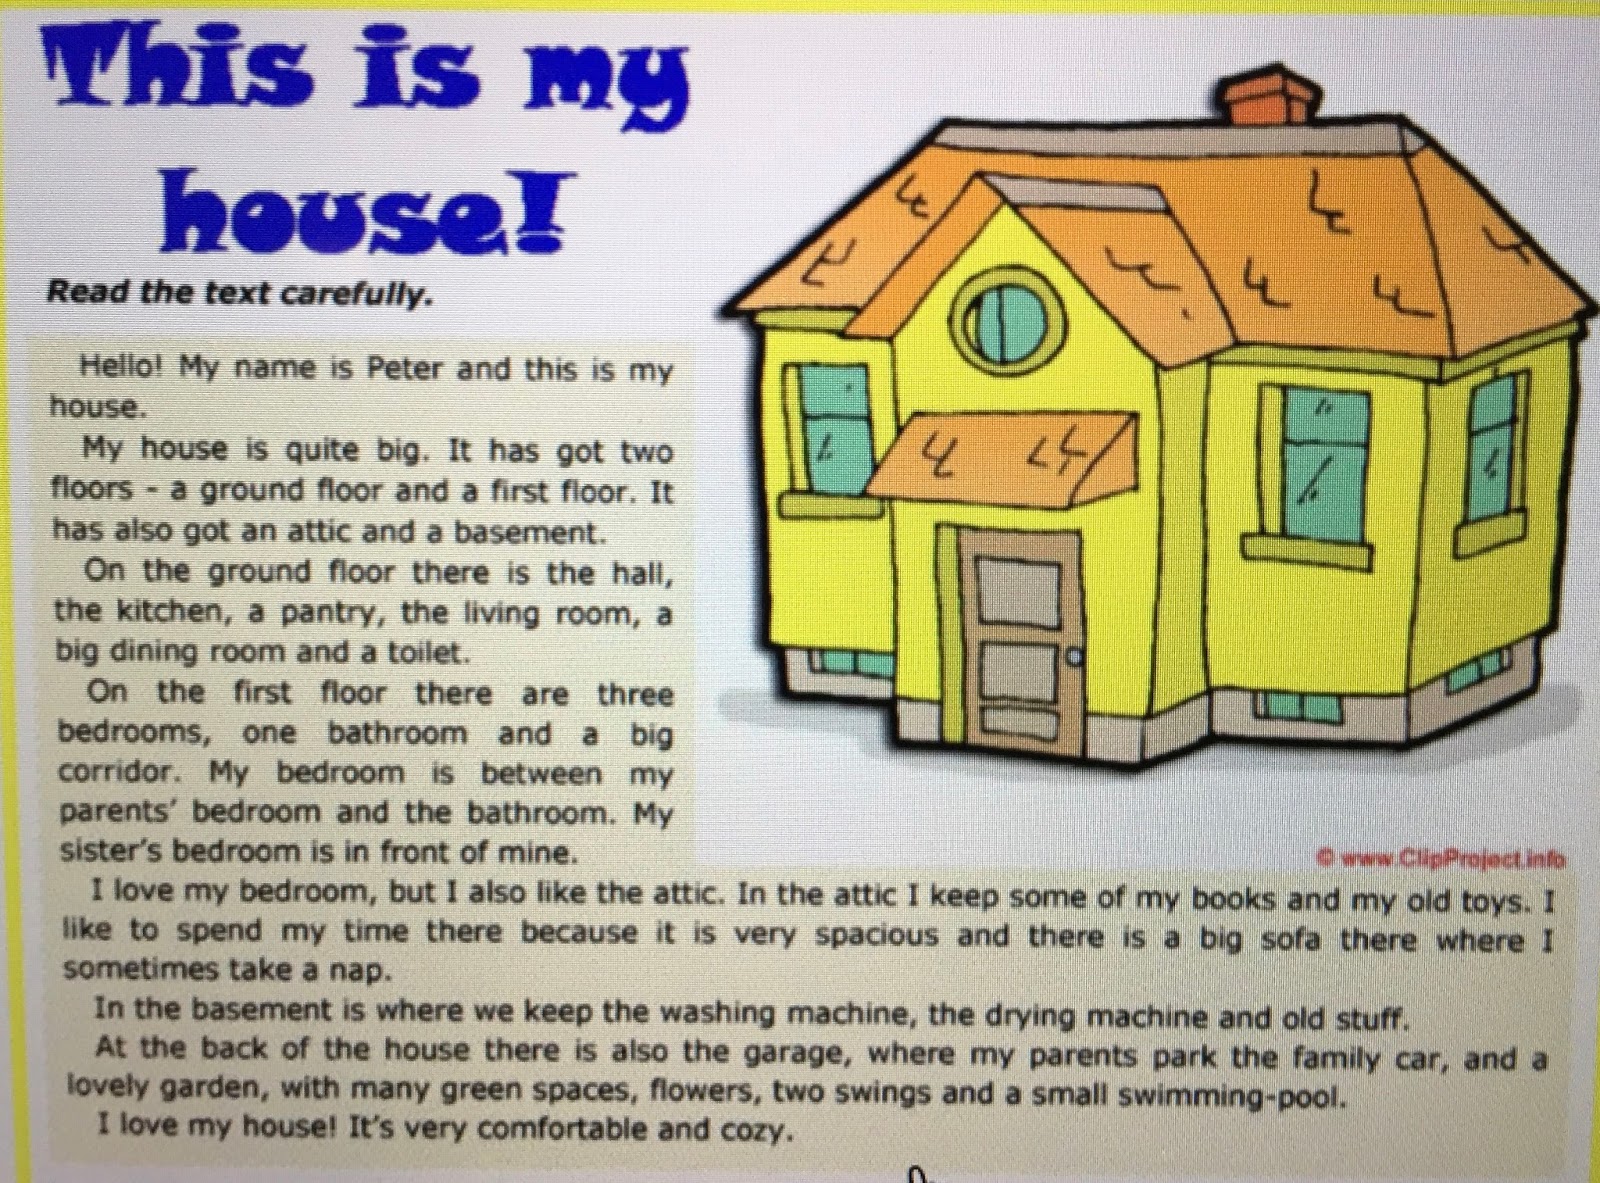 My first house